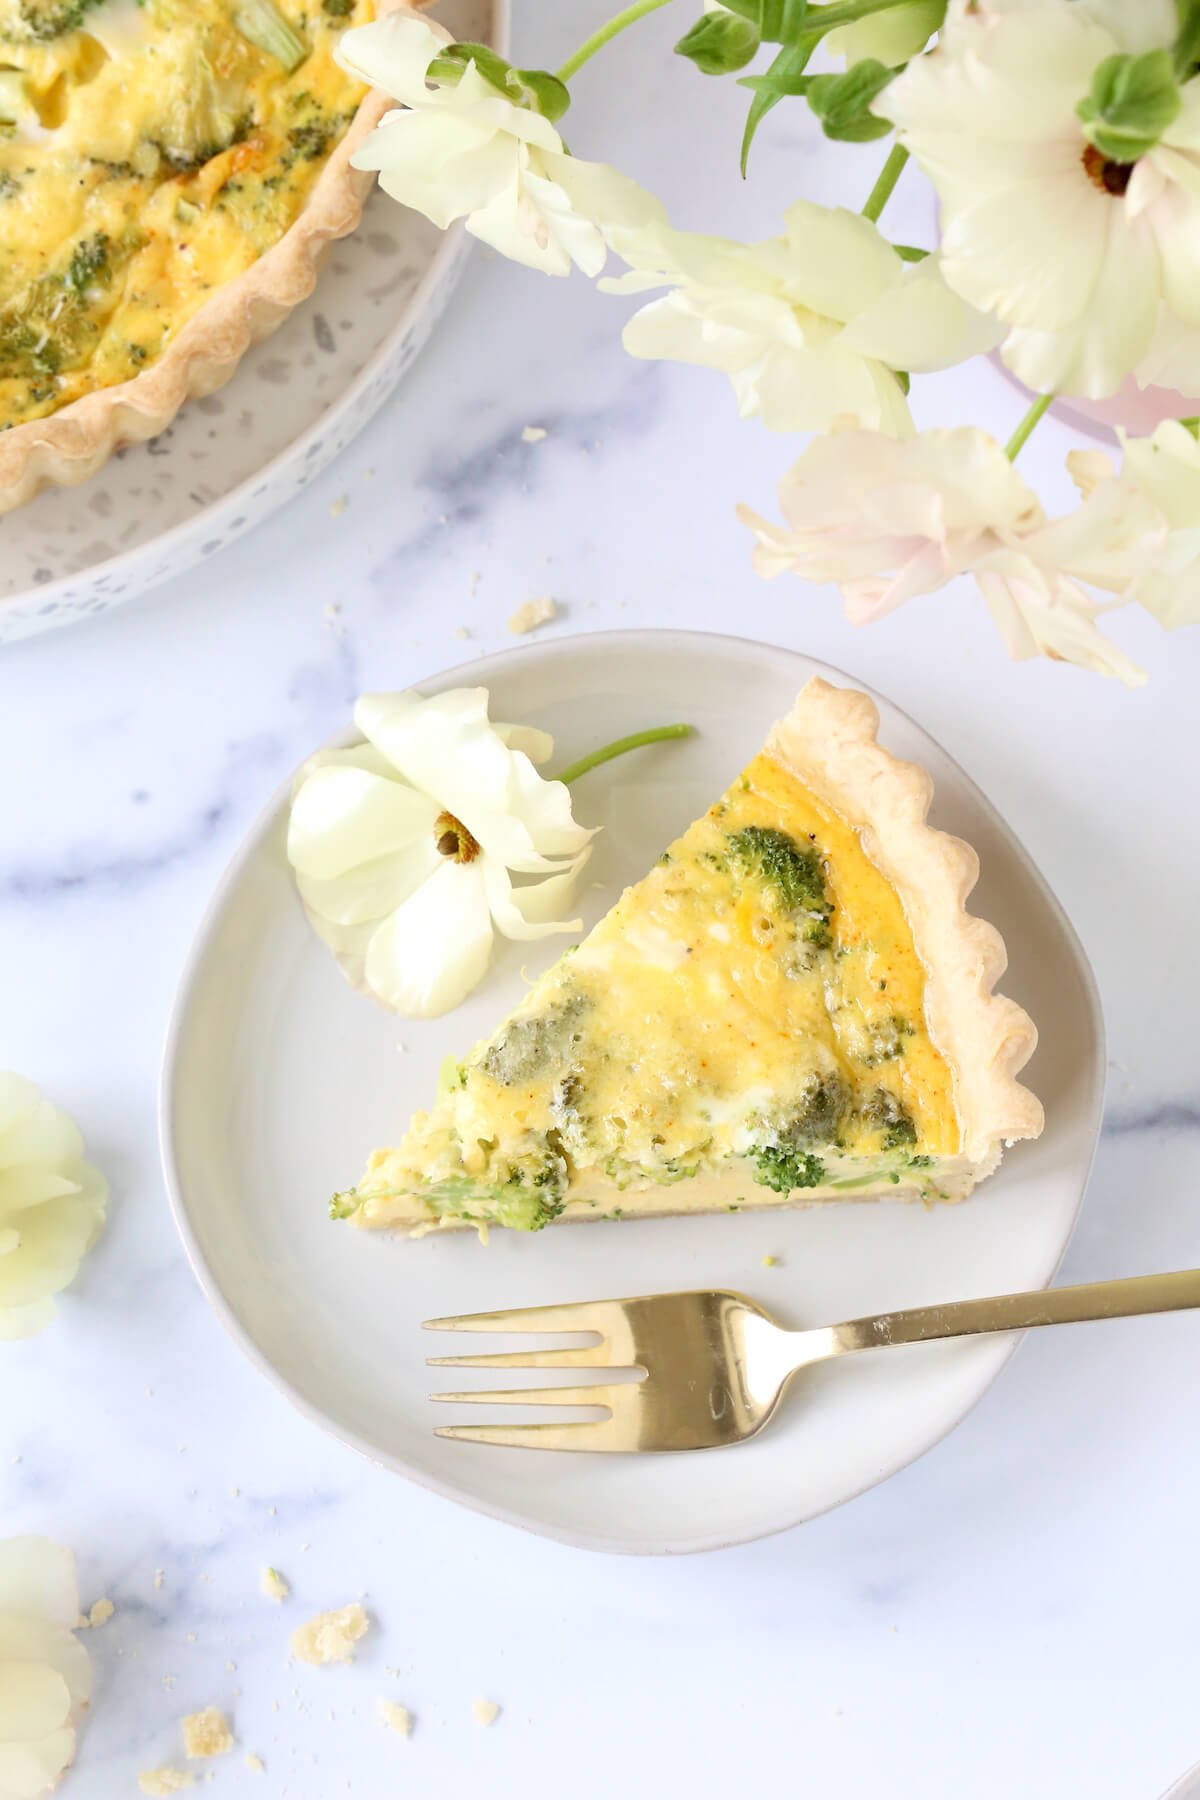 A slice of quiche on a plate with a gold fork and a white flower.